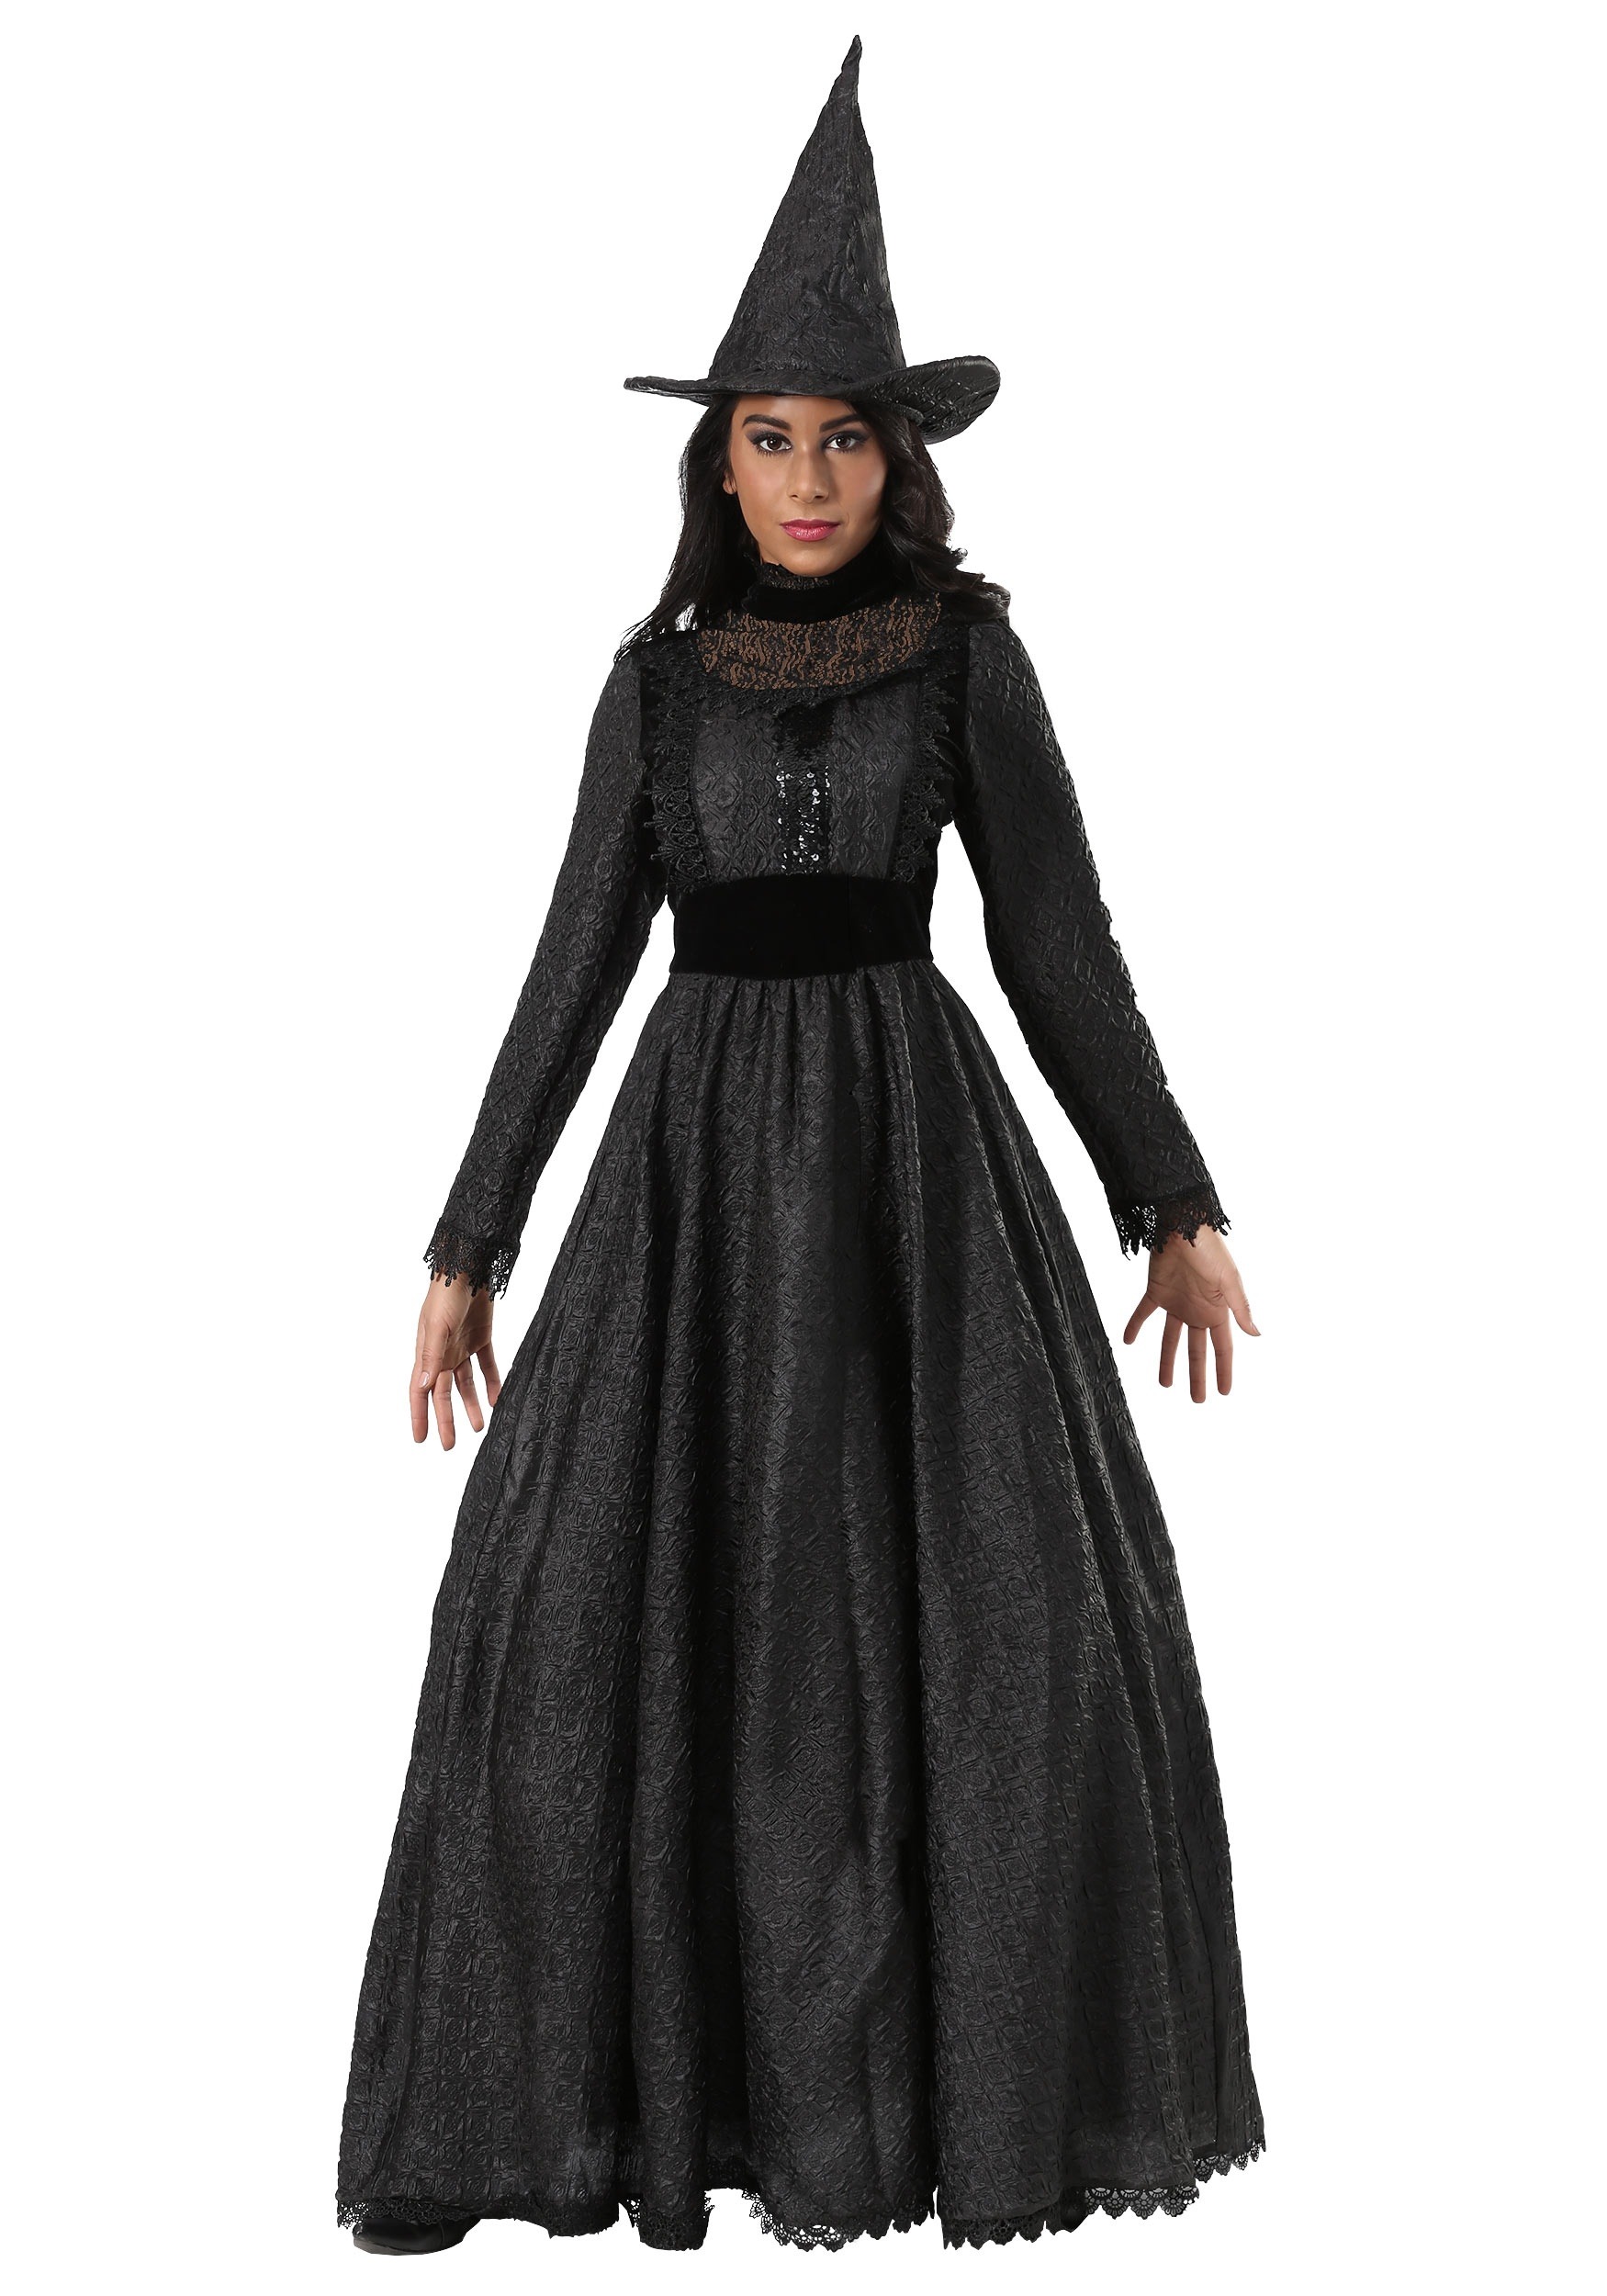 Photos - Fancy Dress Deluxe FUN Costumes  Wicked Witch Adult Costume Black FUN6695AD 